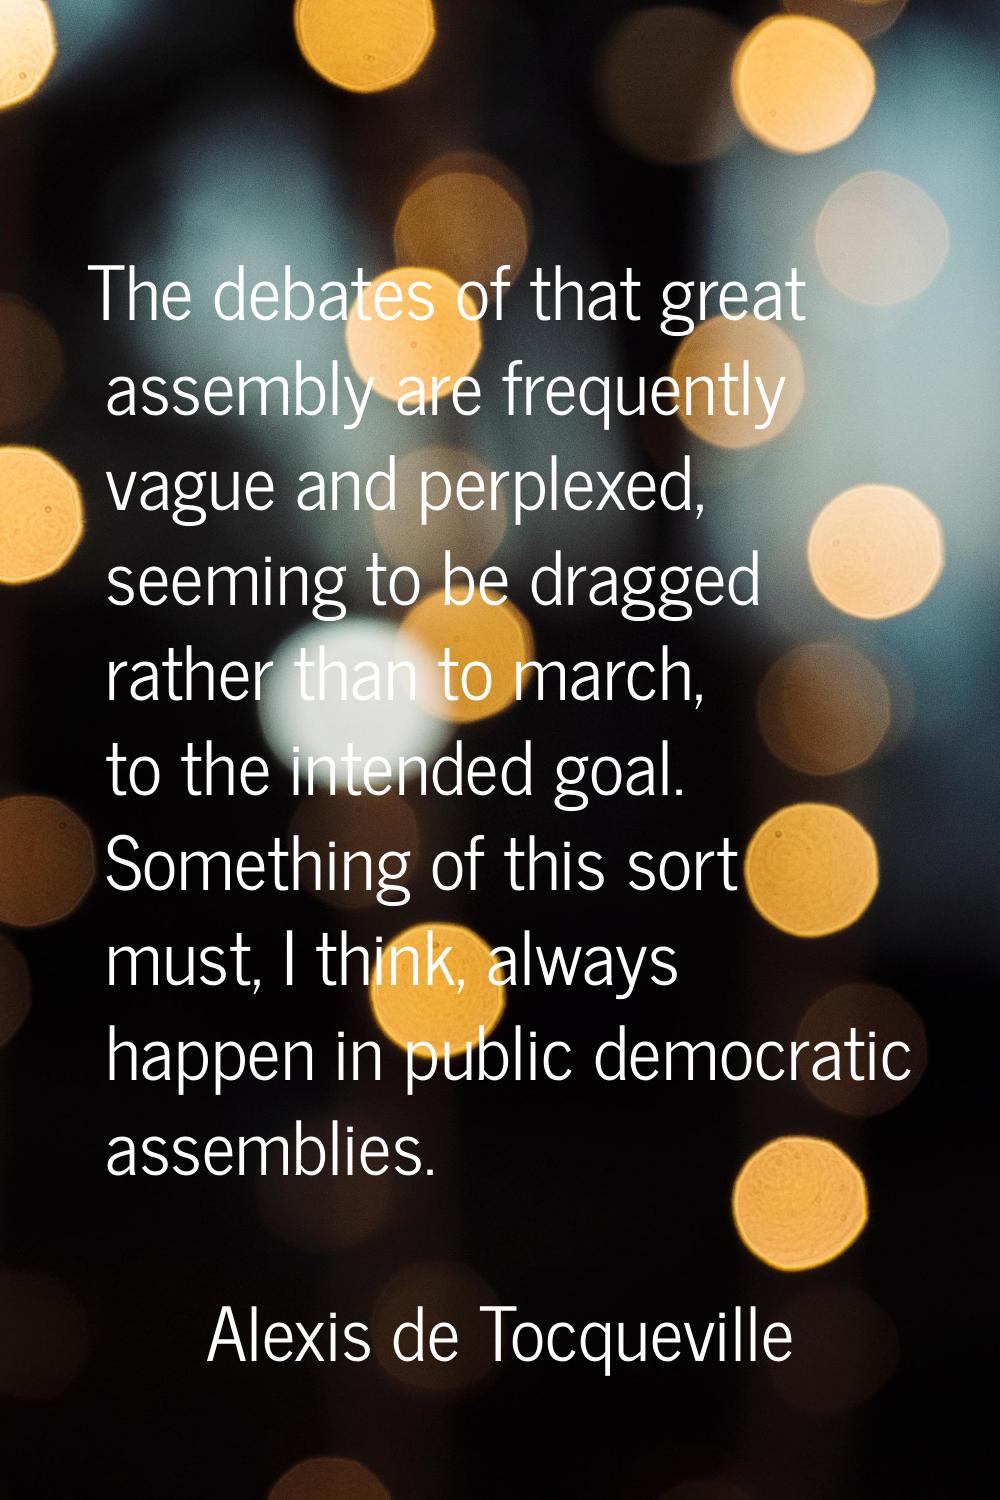 The debates of that great assembly are frequently vague and perplexed, seeming to be dragged rather